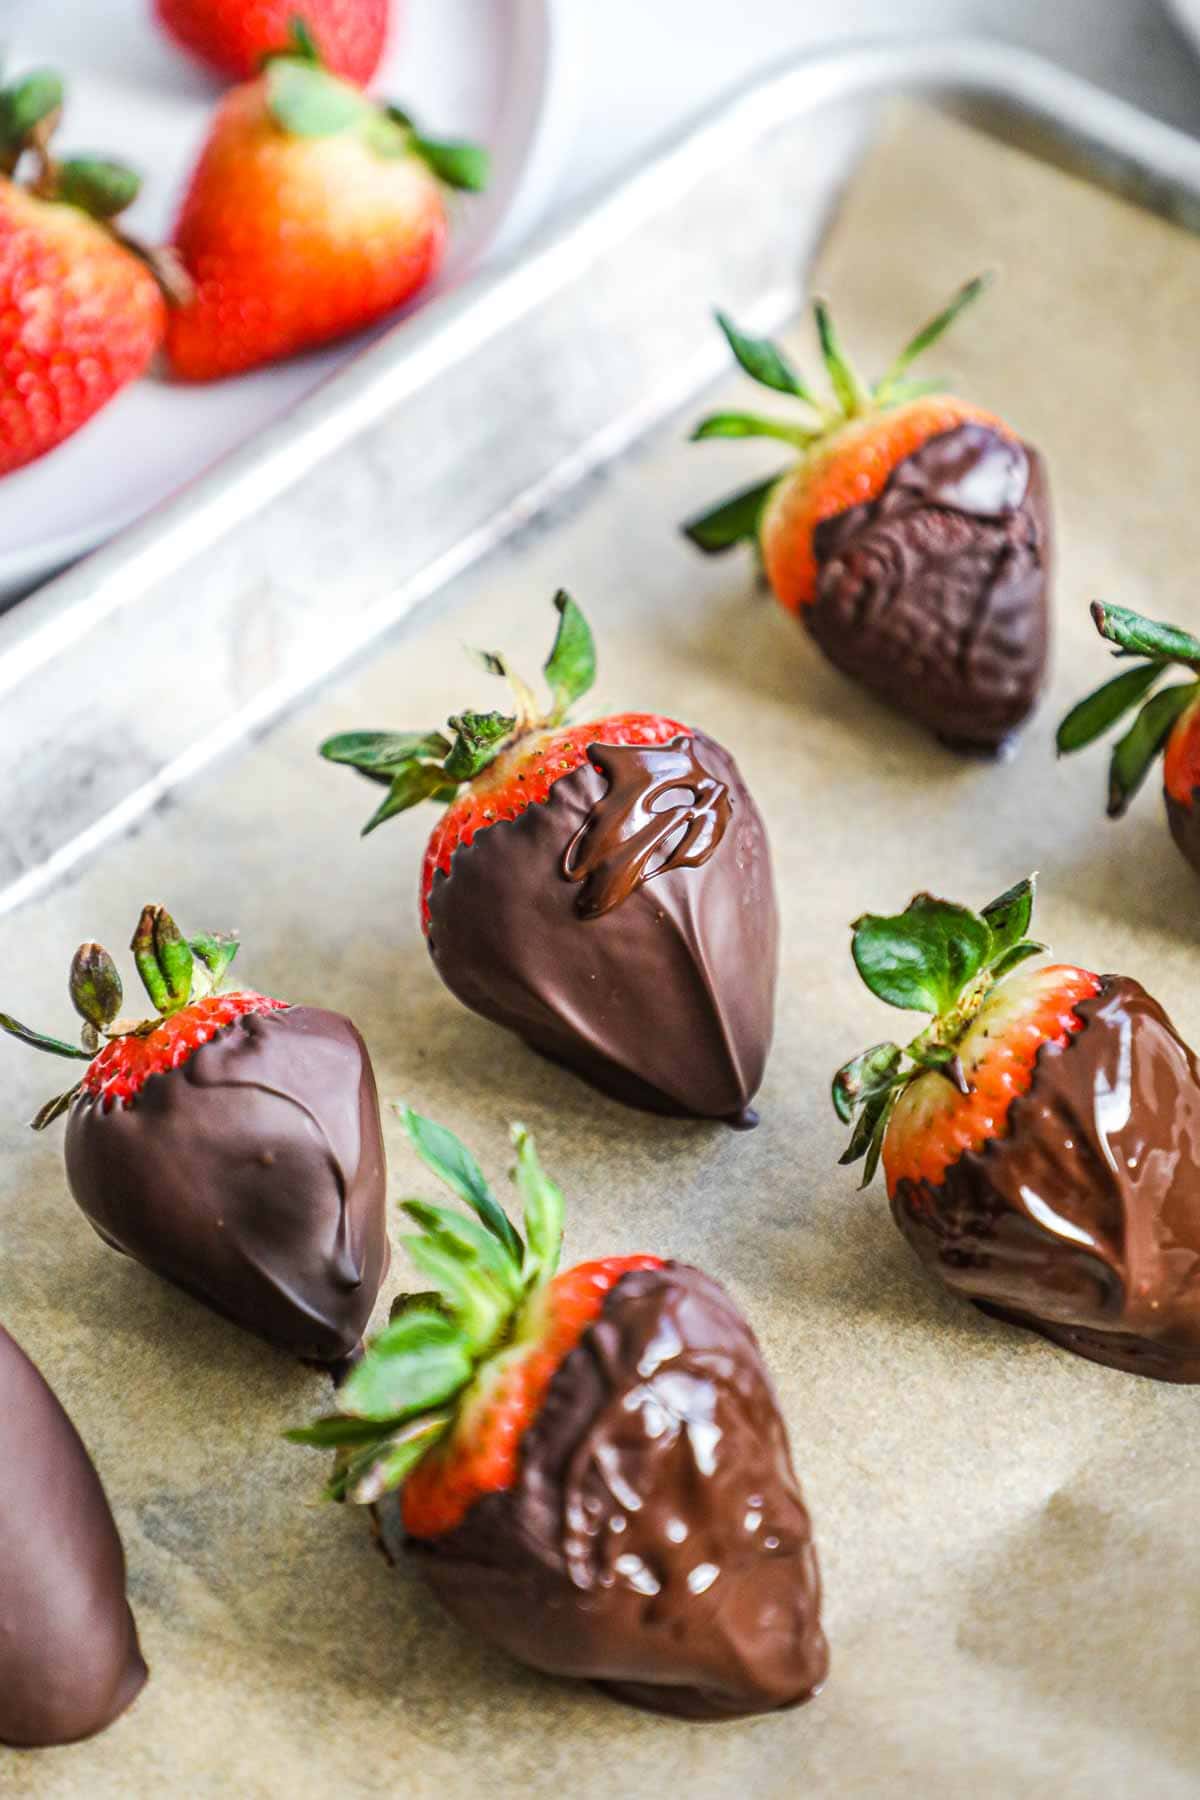 Chocolate covered strawberries on a baking sheet lined with parchment paper.